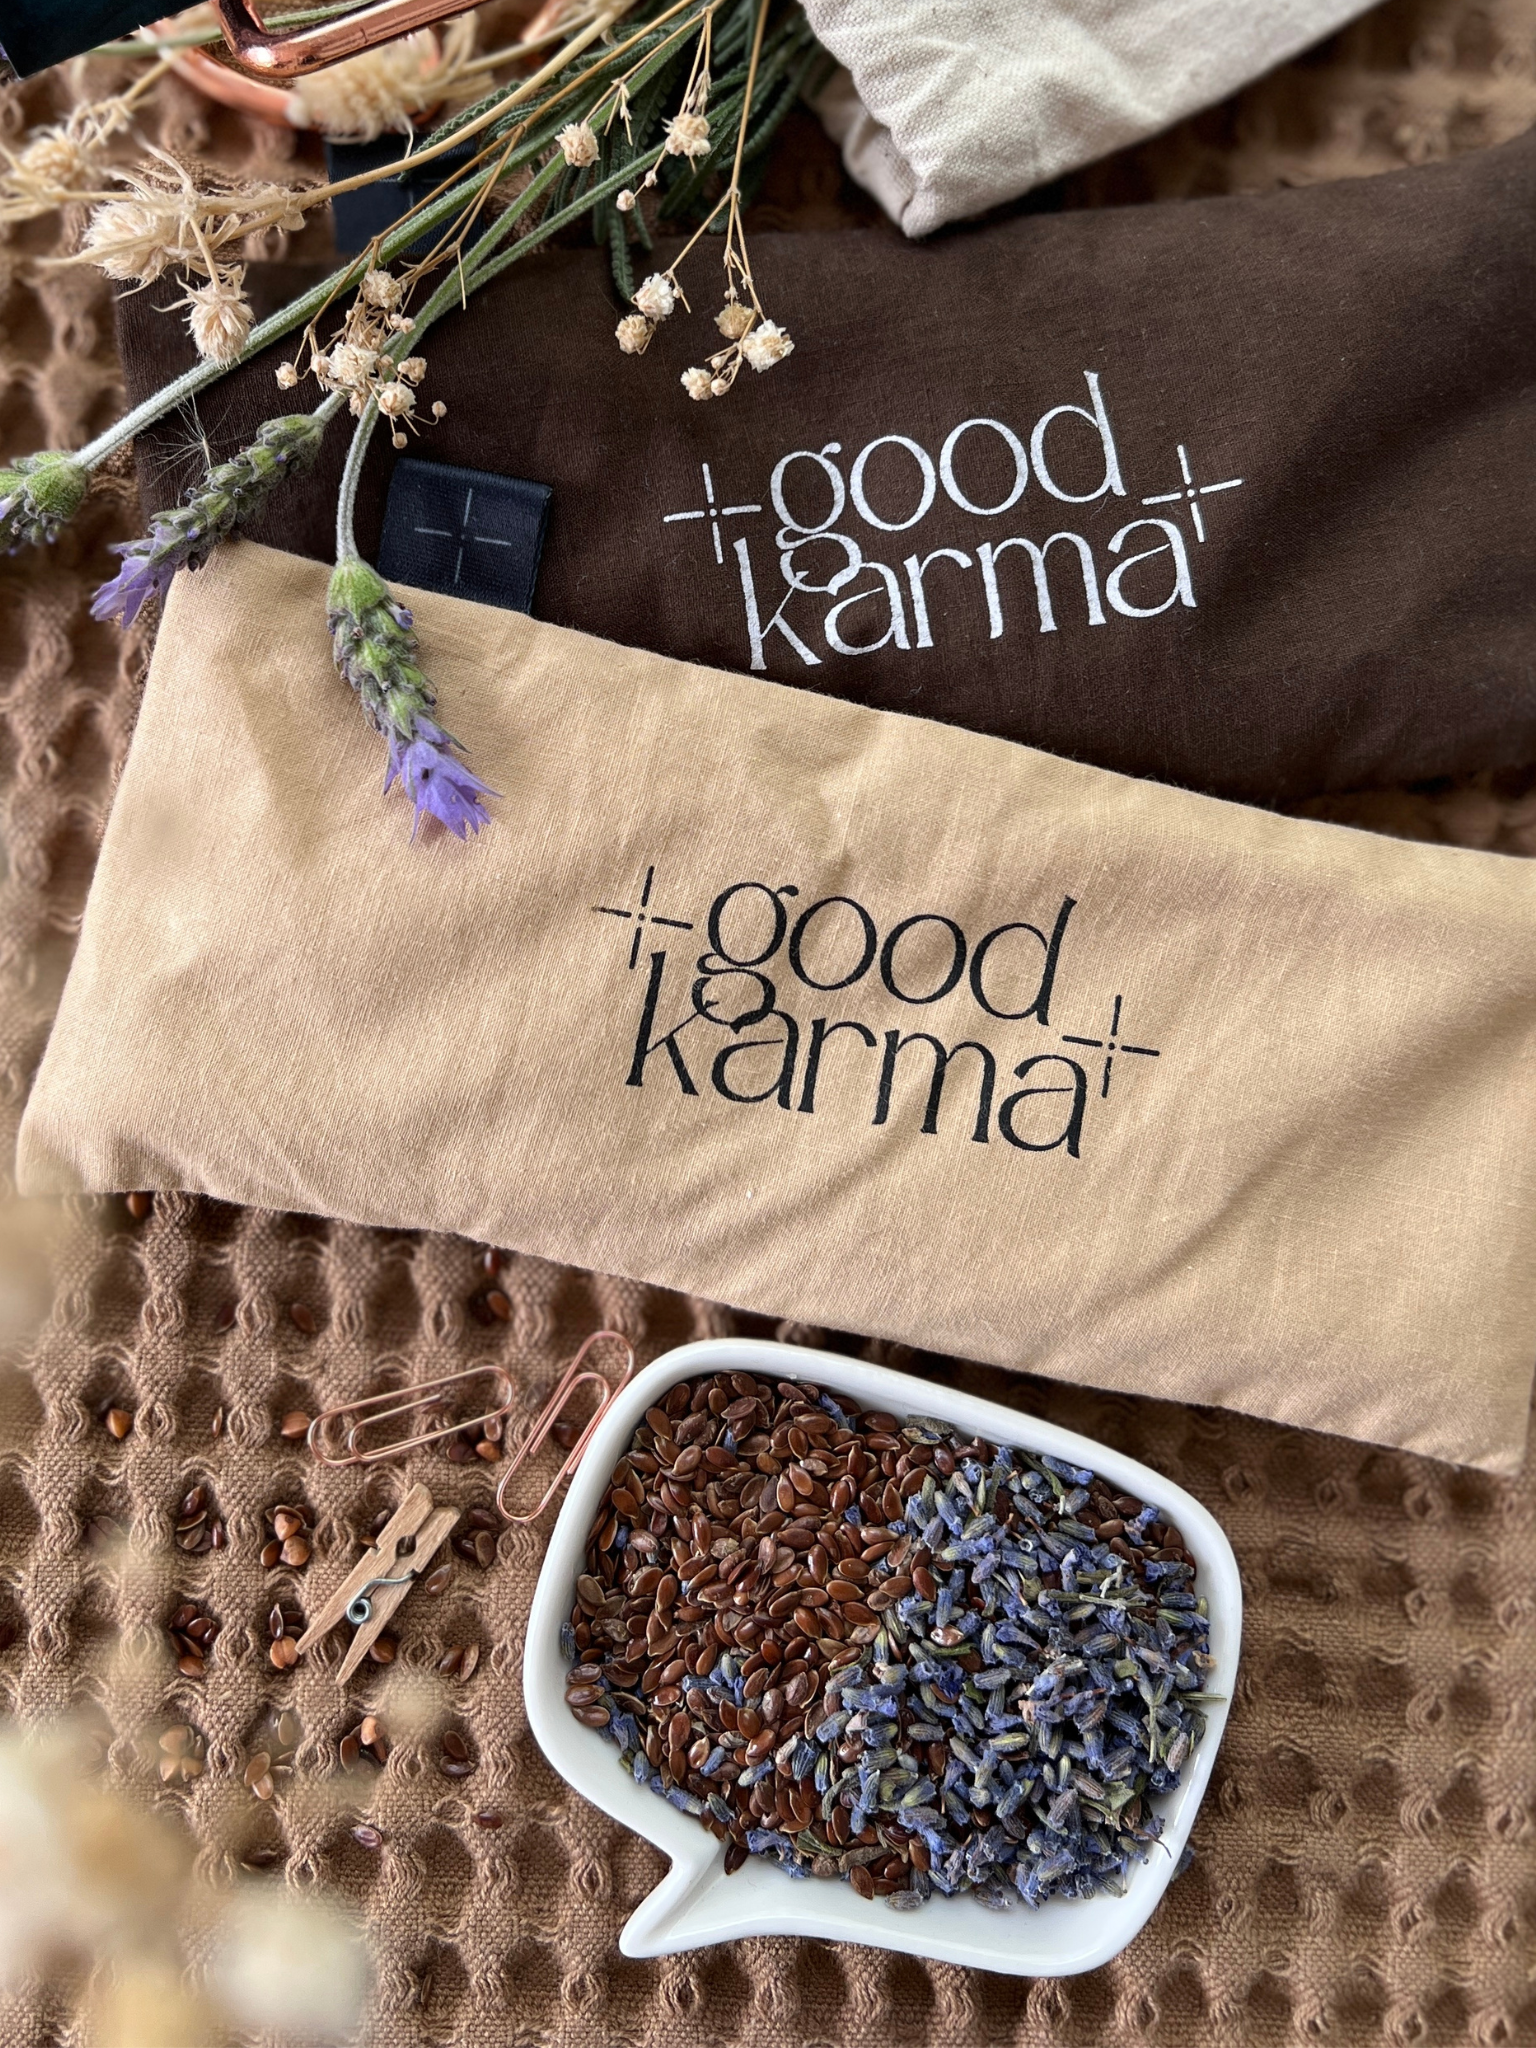 Good Karma organic flax and lavender eye pillows for meditation and relaxation 3 colors - sand beige dark chocolate brown with flaxseeds and dry lavender buds 